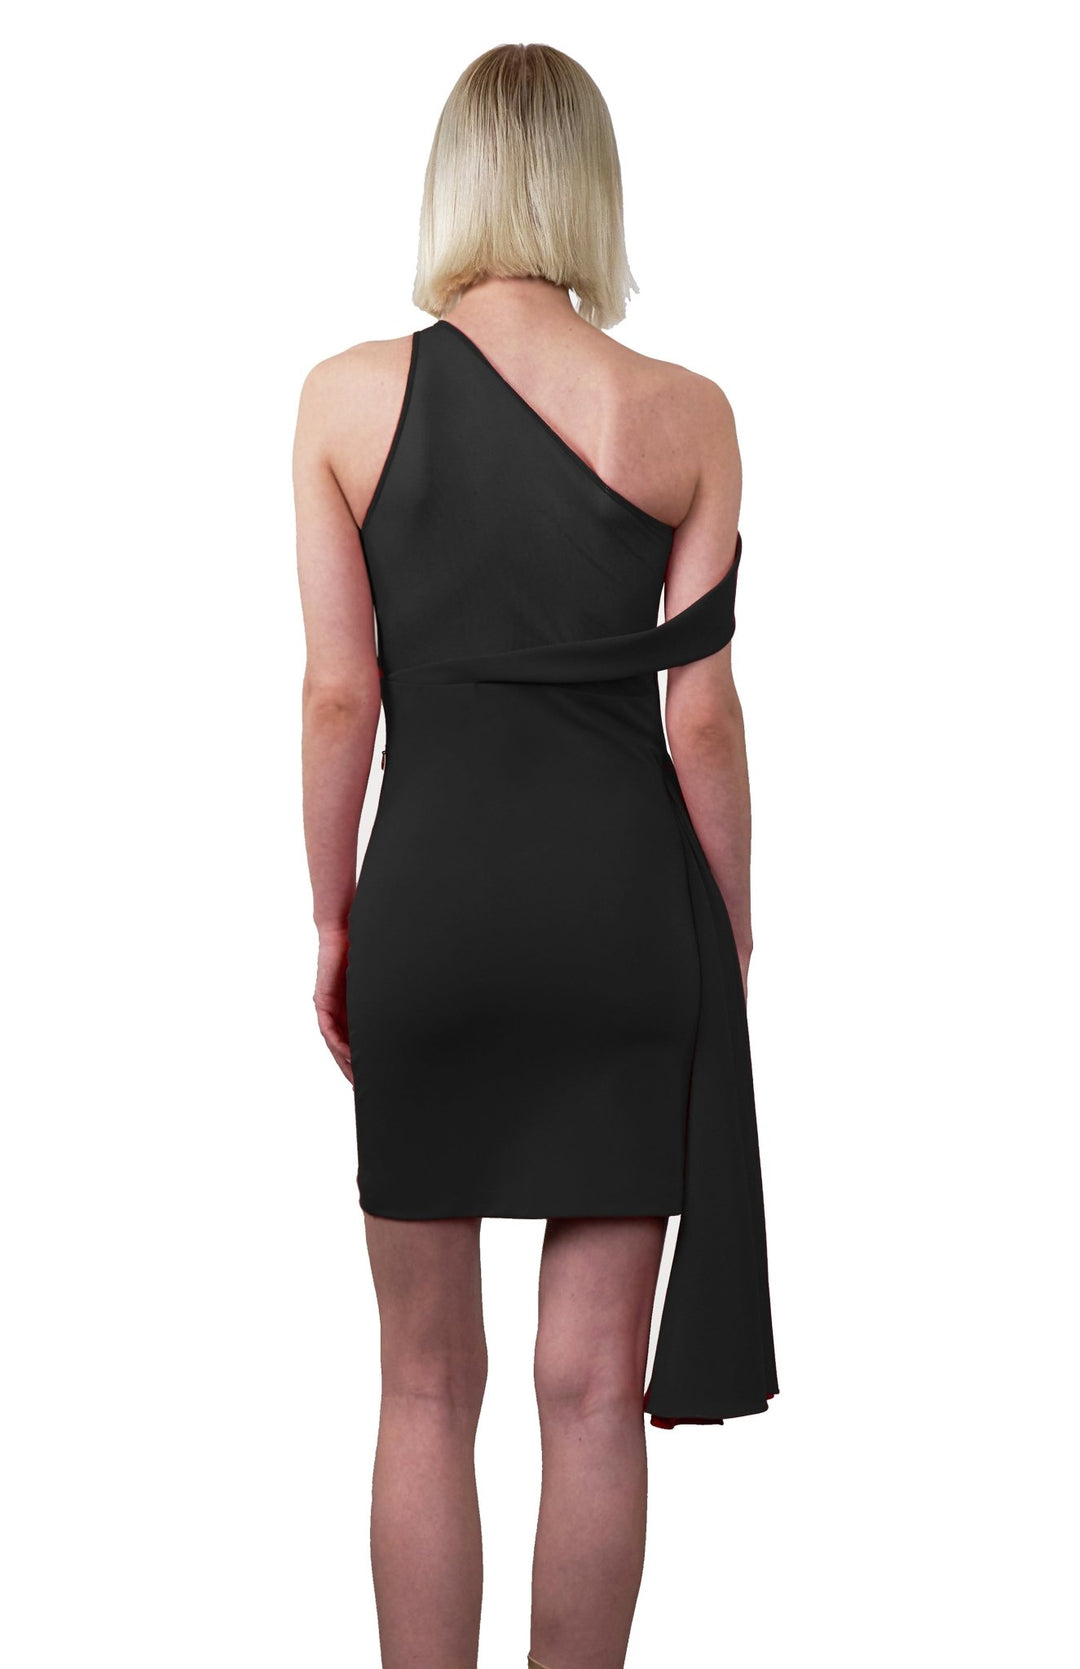 Chic, black,  one shoulder, draped, party bodycon short dress with sheer mesh back detail.